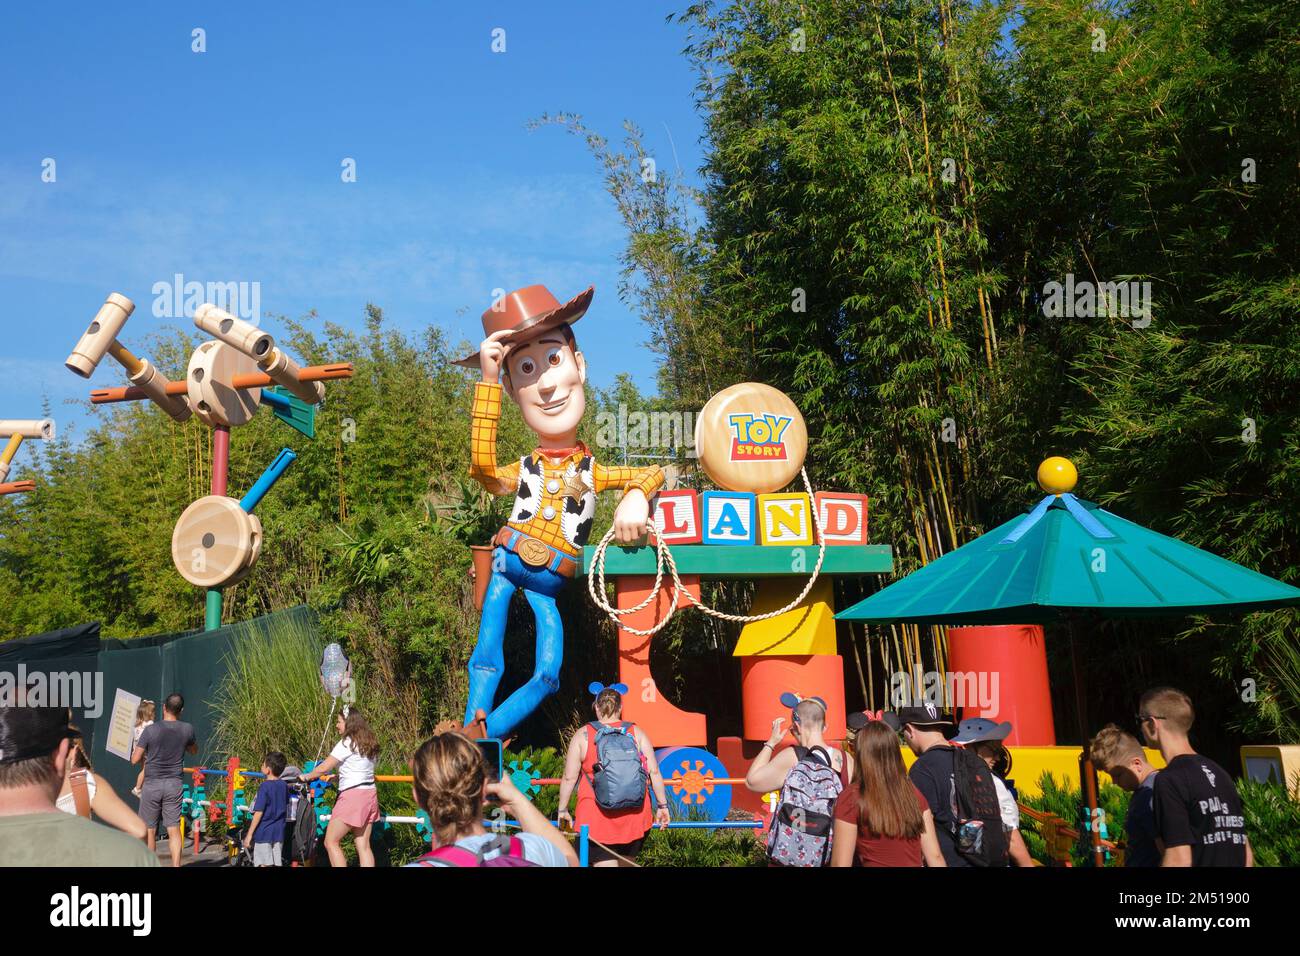 the Woody Photo Op Toy Story Land Disney World Hollywood Studios Stock Photo